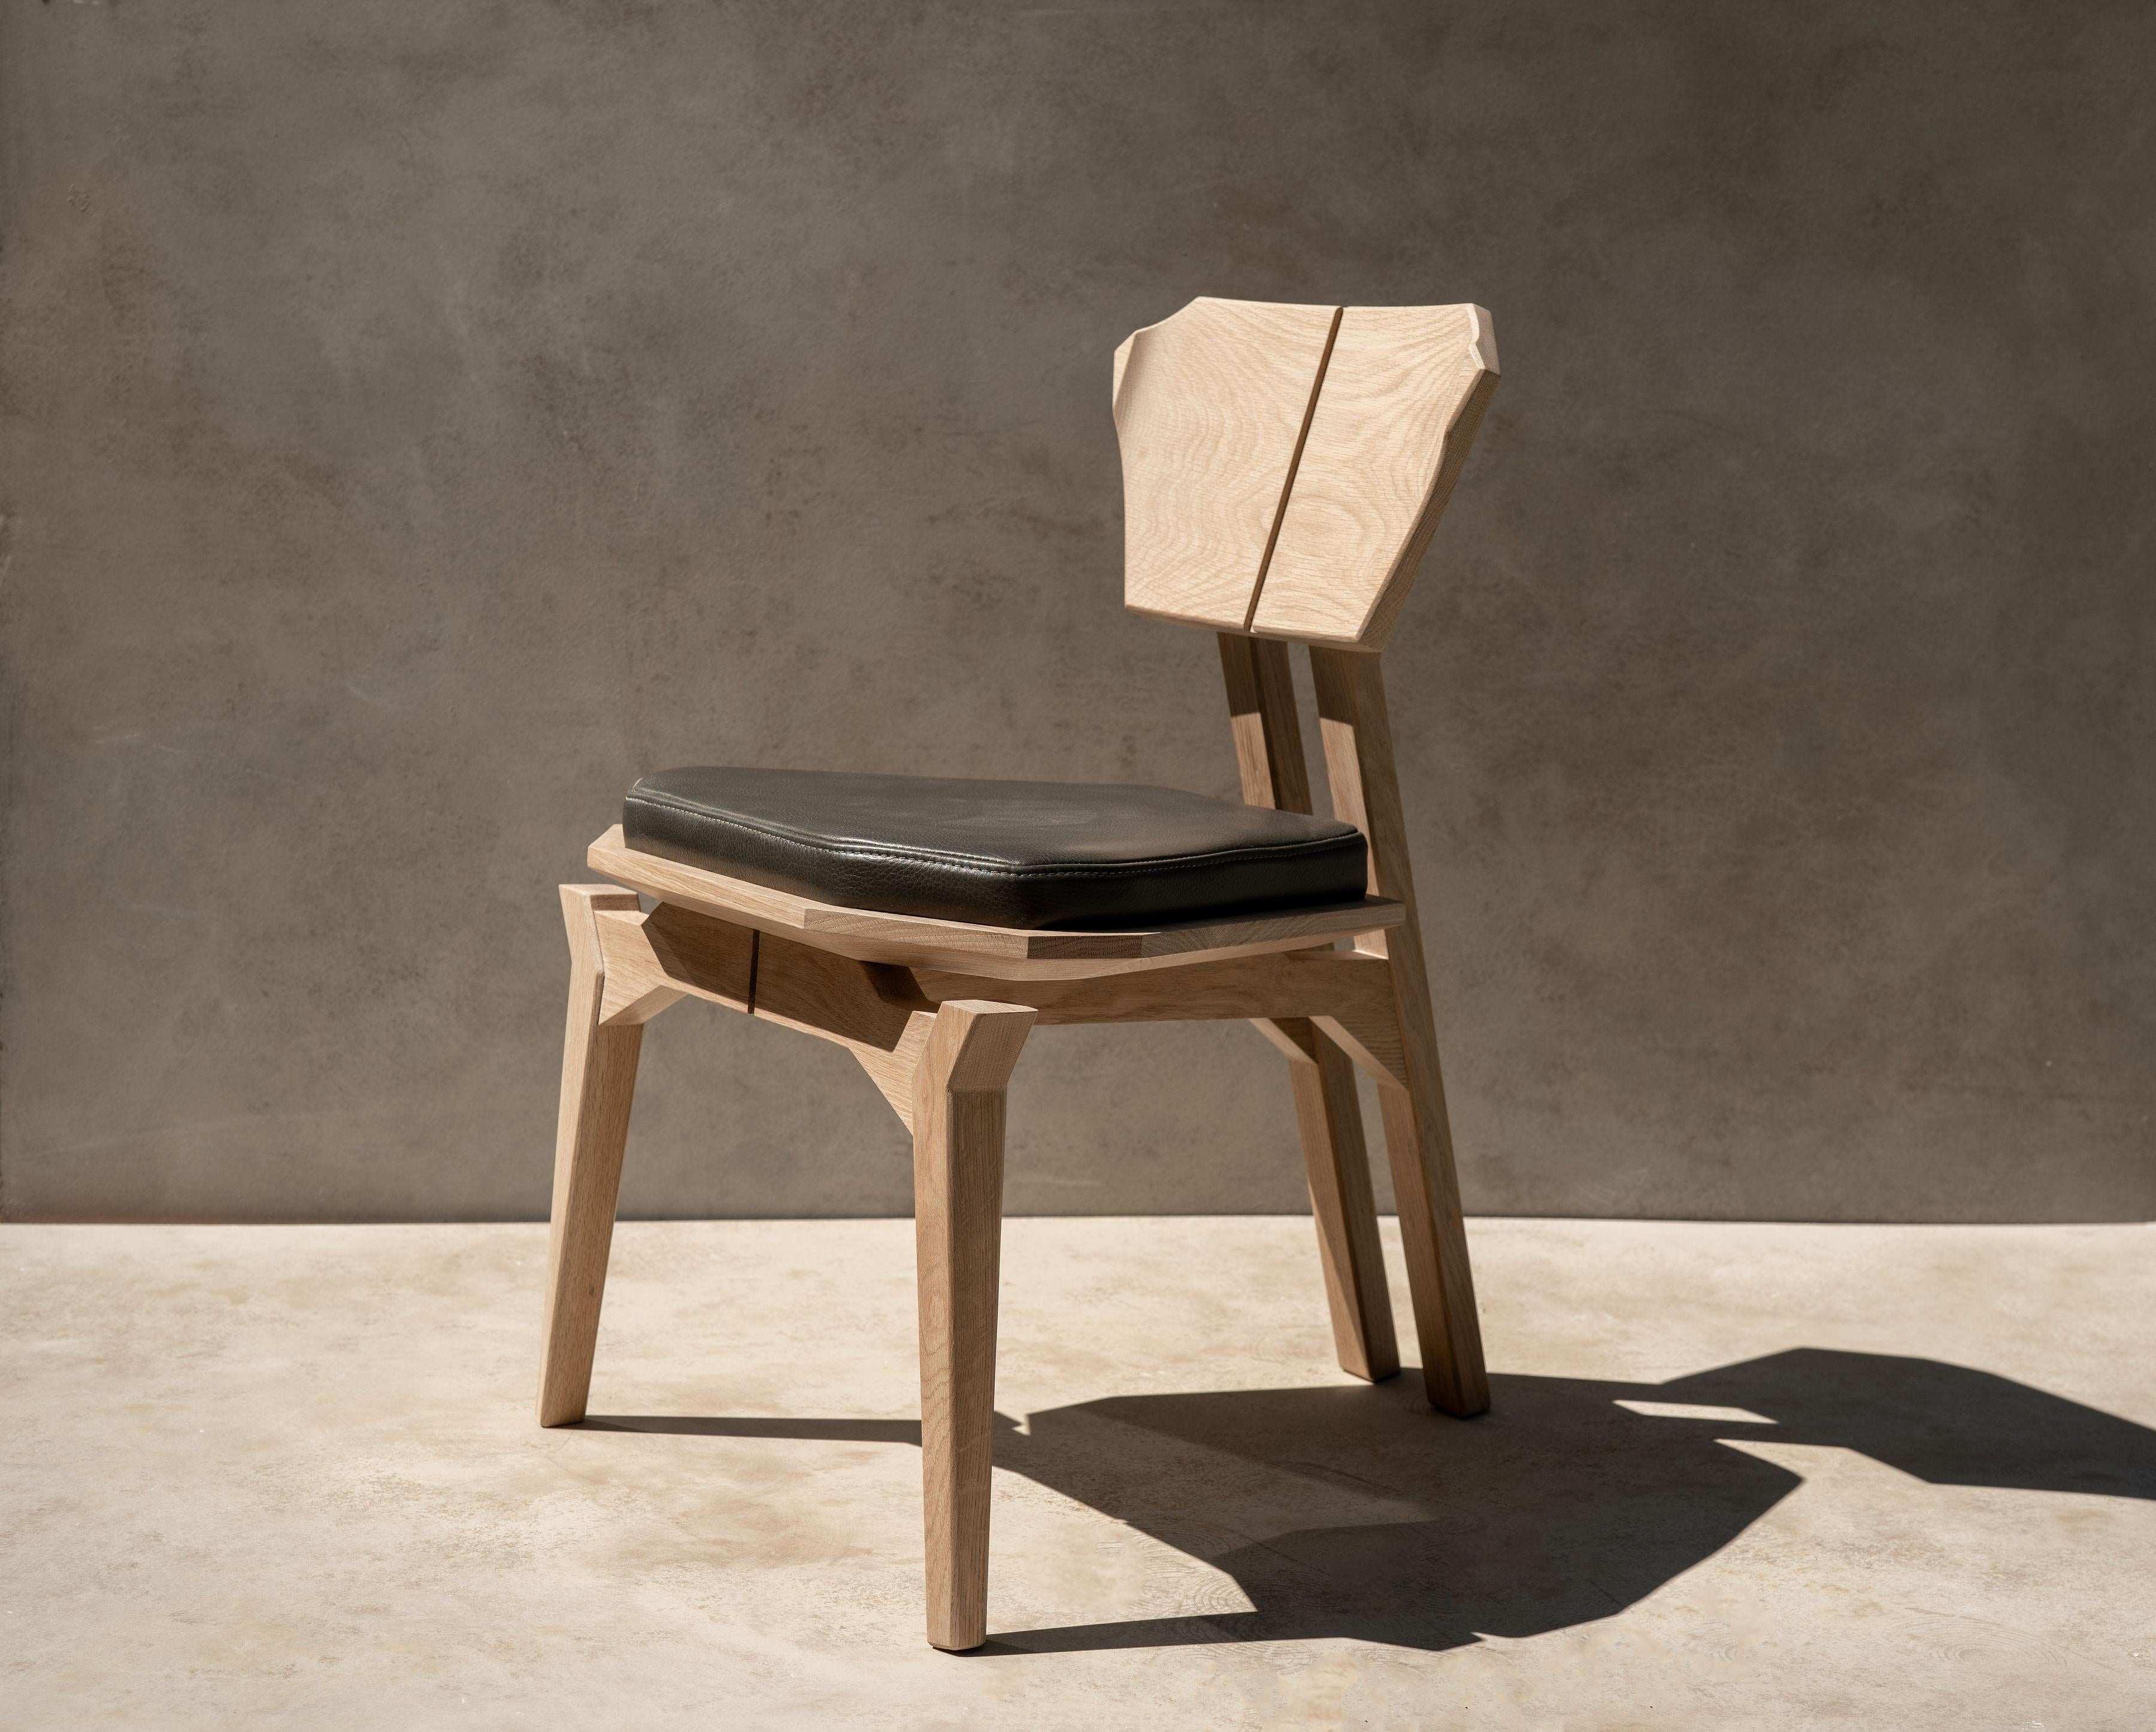 Ángulo chair by Arturo Verástegui
Dimensions: D 54 x W 60 x H 78 cm
Materials: oak wood, leather.
Available in leather or fabric.

Chair made of burnt and natural white oak with upholstered seat in fabric or leather.

Arturo Verástegui has